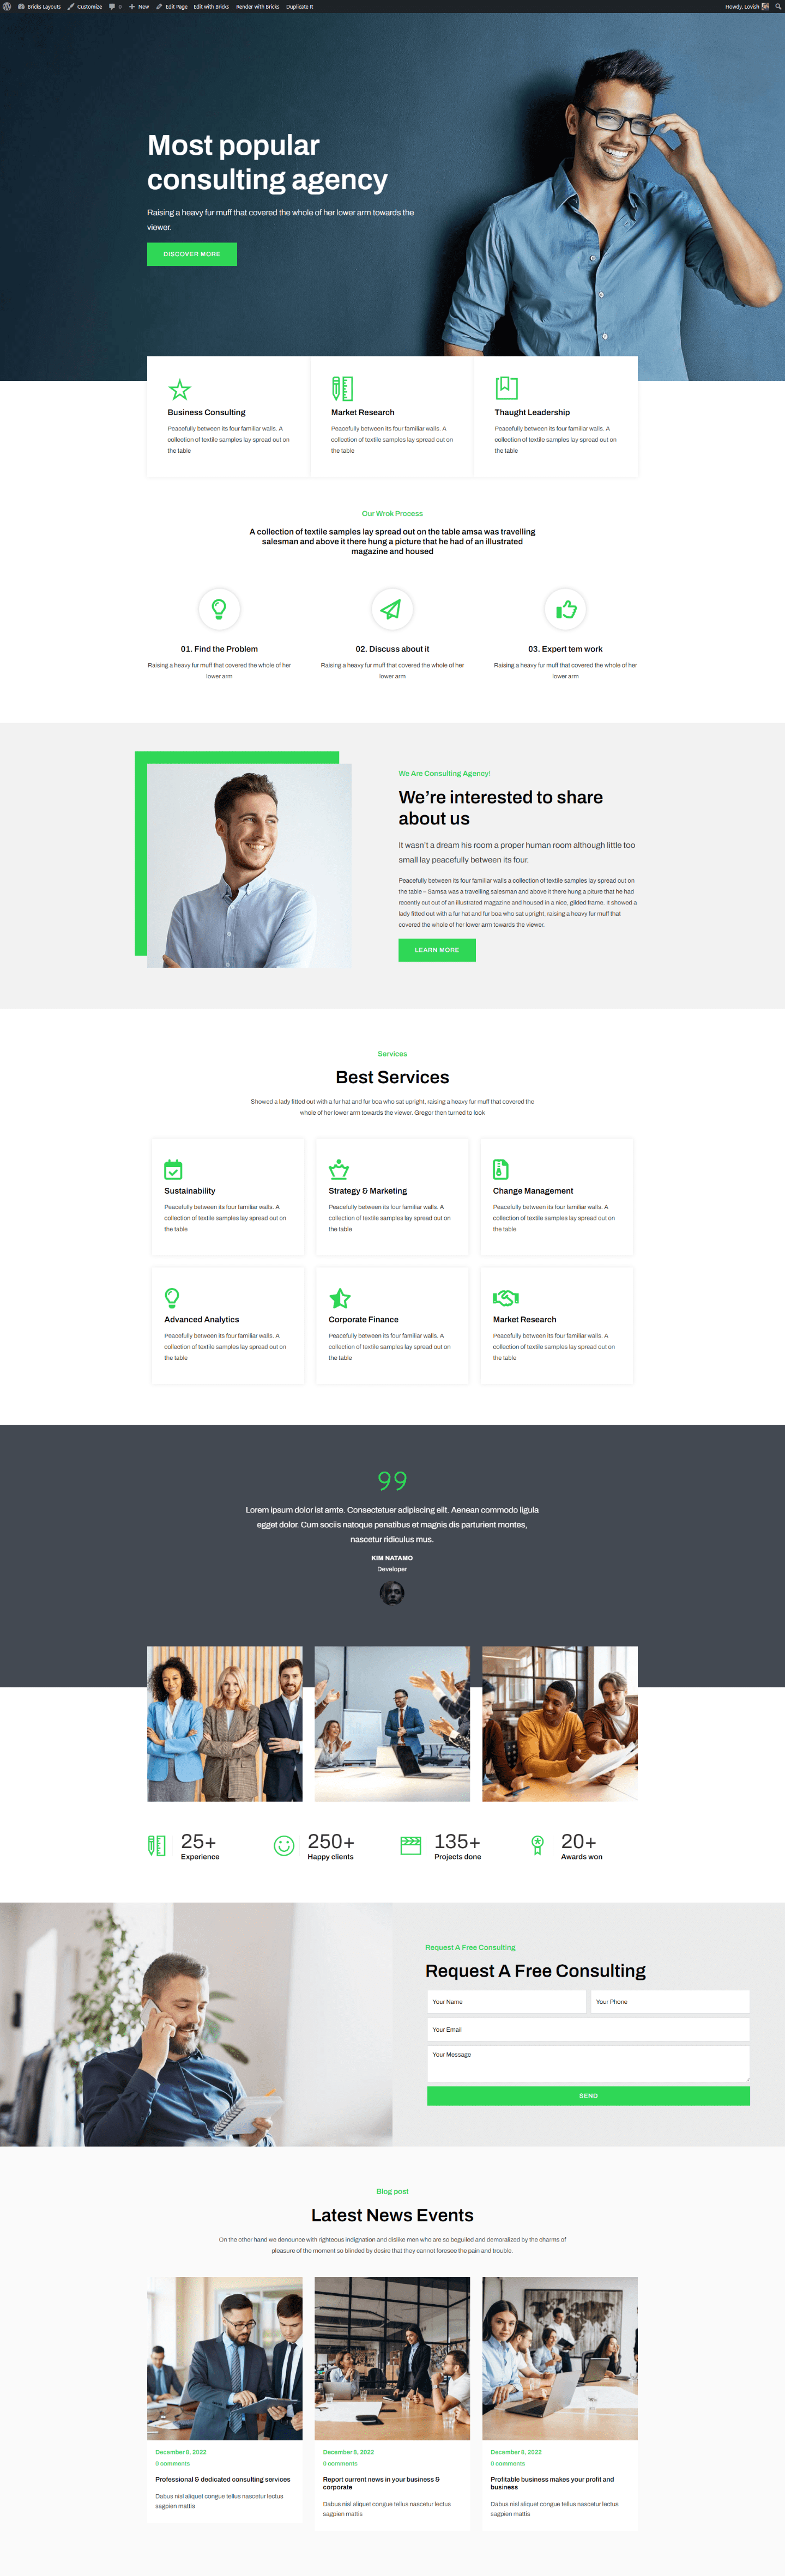 Bricks Consulting Agency Layout Full Width